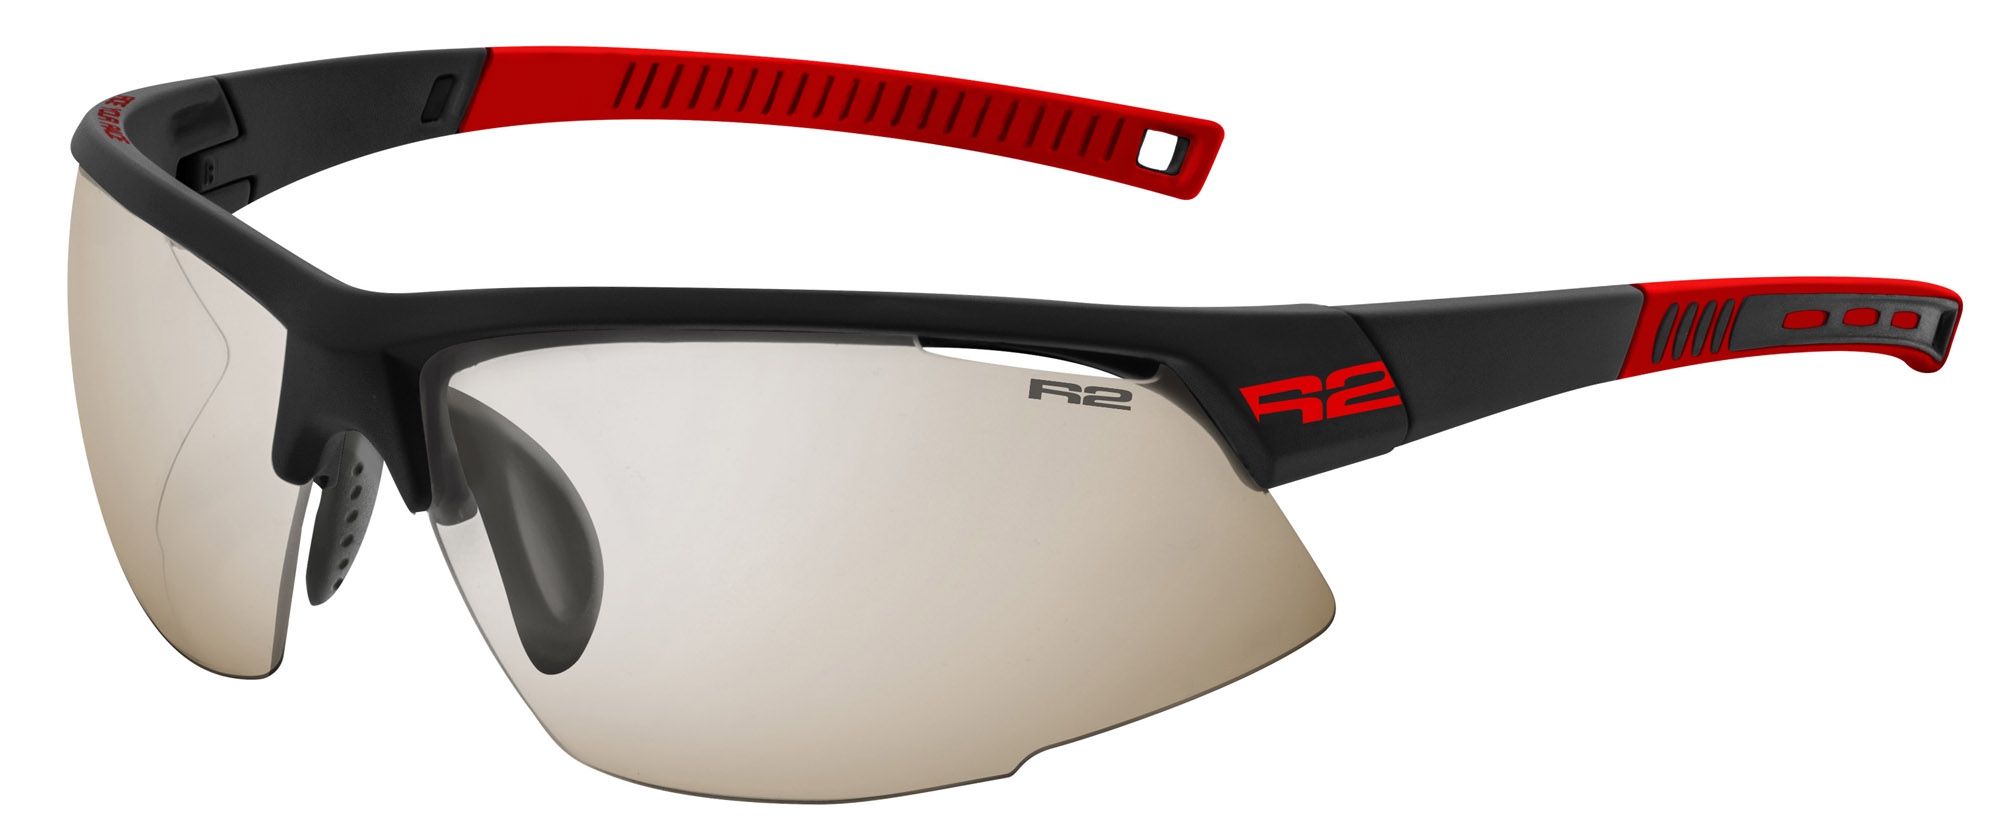 Photochromatic sunglasses  R2 RACER AT063W